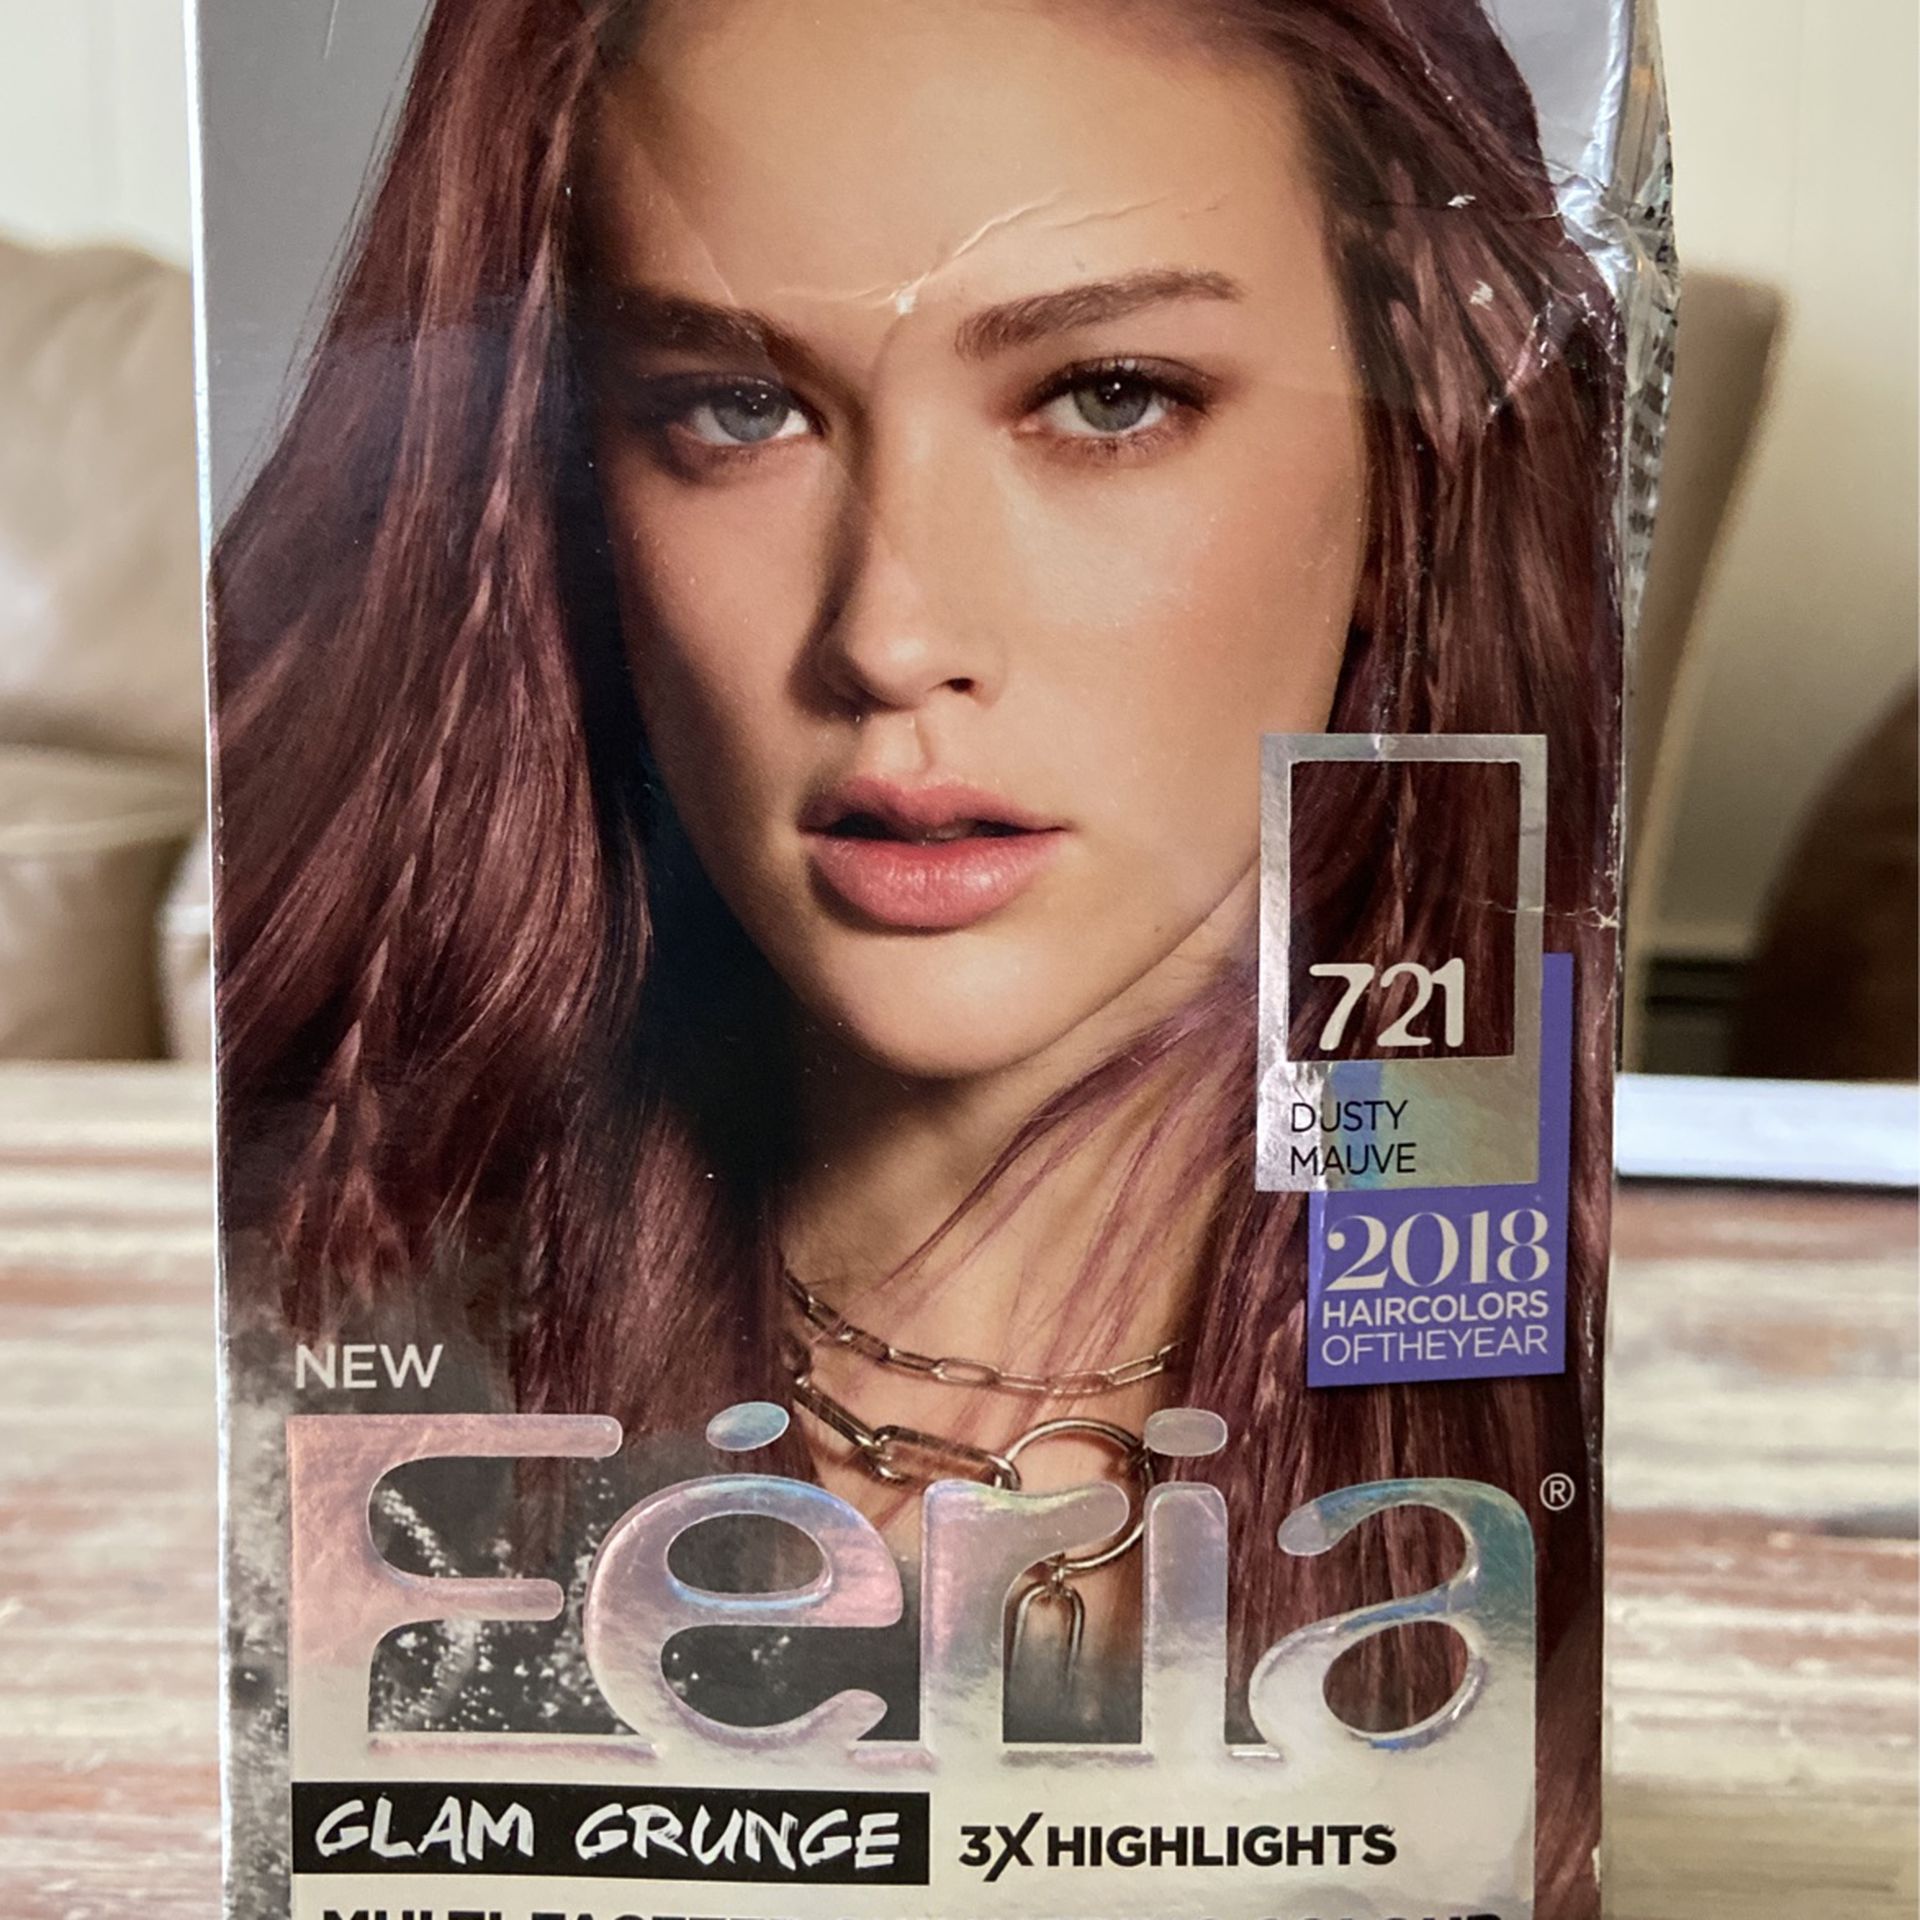 Loreal Feria Glam Grunge Dusty Mauve 721 for Sale in W Colls, NJ - OfferUp